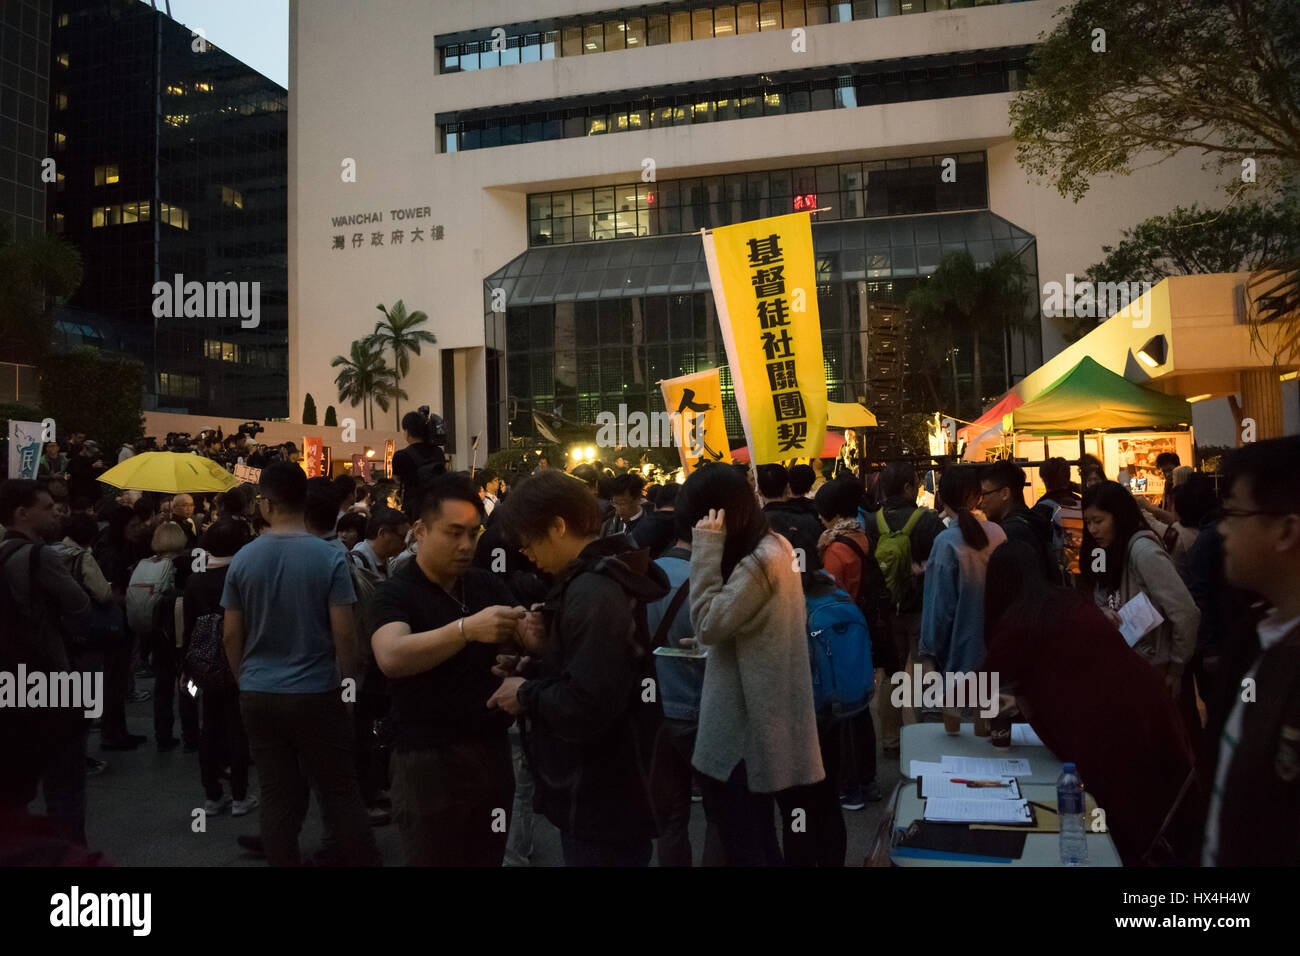 Hong Kong SAR, China. 25th March, 2017. Demonstrations, protests, and yellow pro-democracy banners as Hong Kong prepares to vote for a new Chief Executive (city's leader) in Hong Kong, China. © RaymondAsiaPhotography / Alamy Live News. Stock Photo